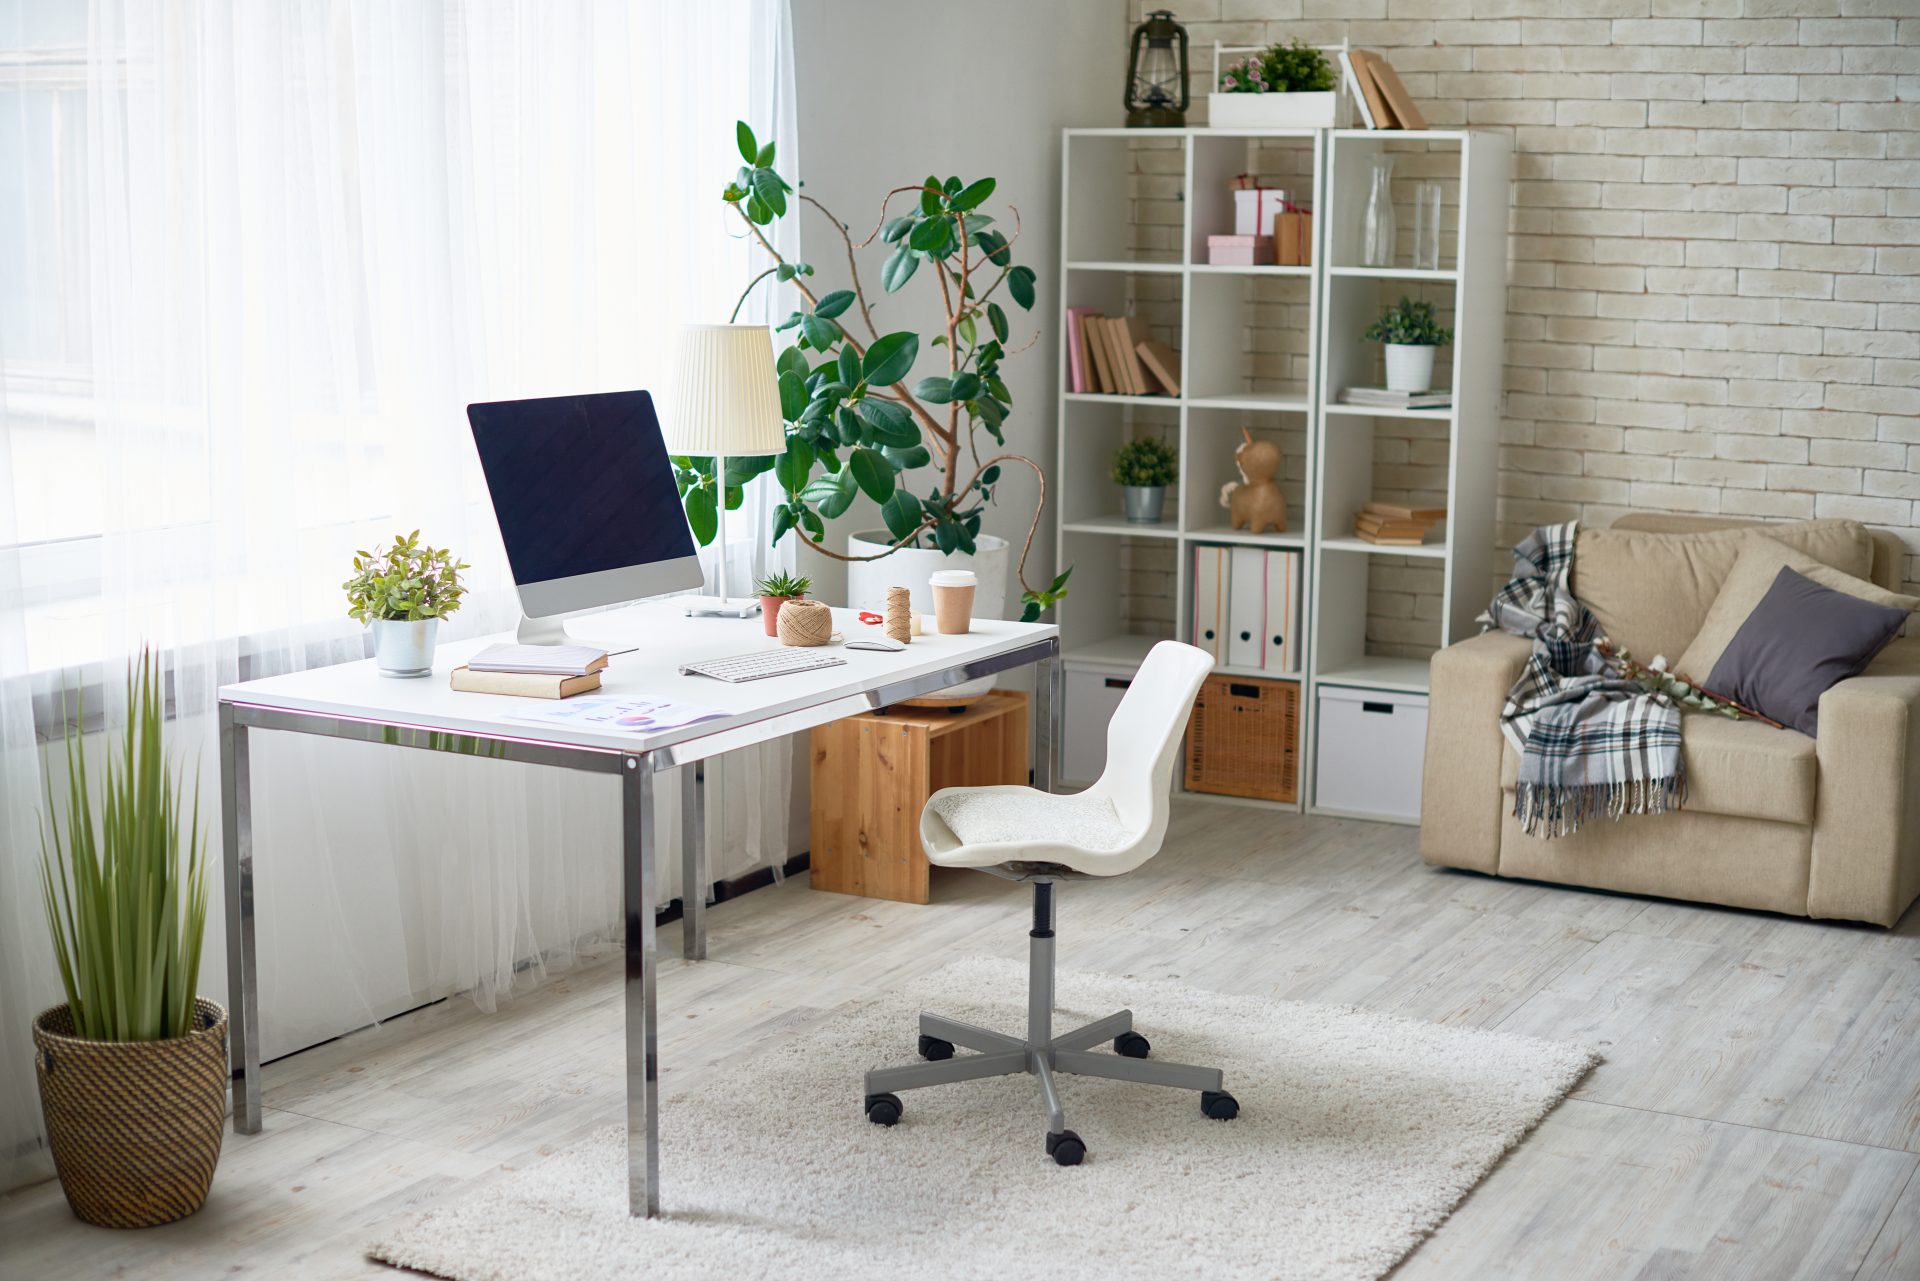 Home office design | Working from home | Simon Blyth Estate Agents